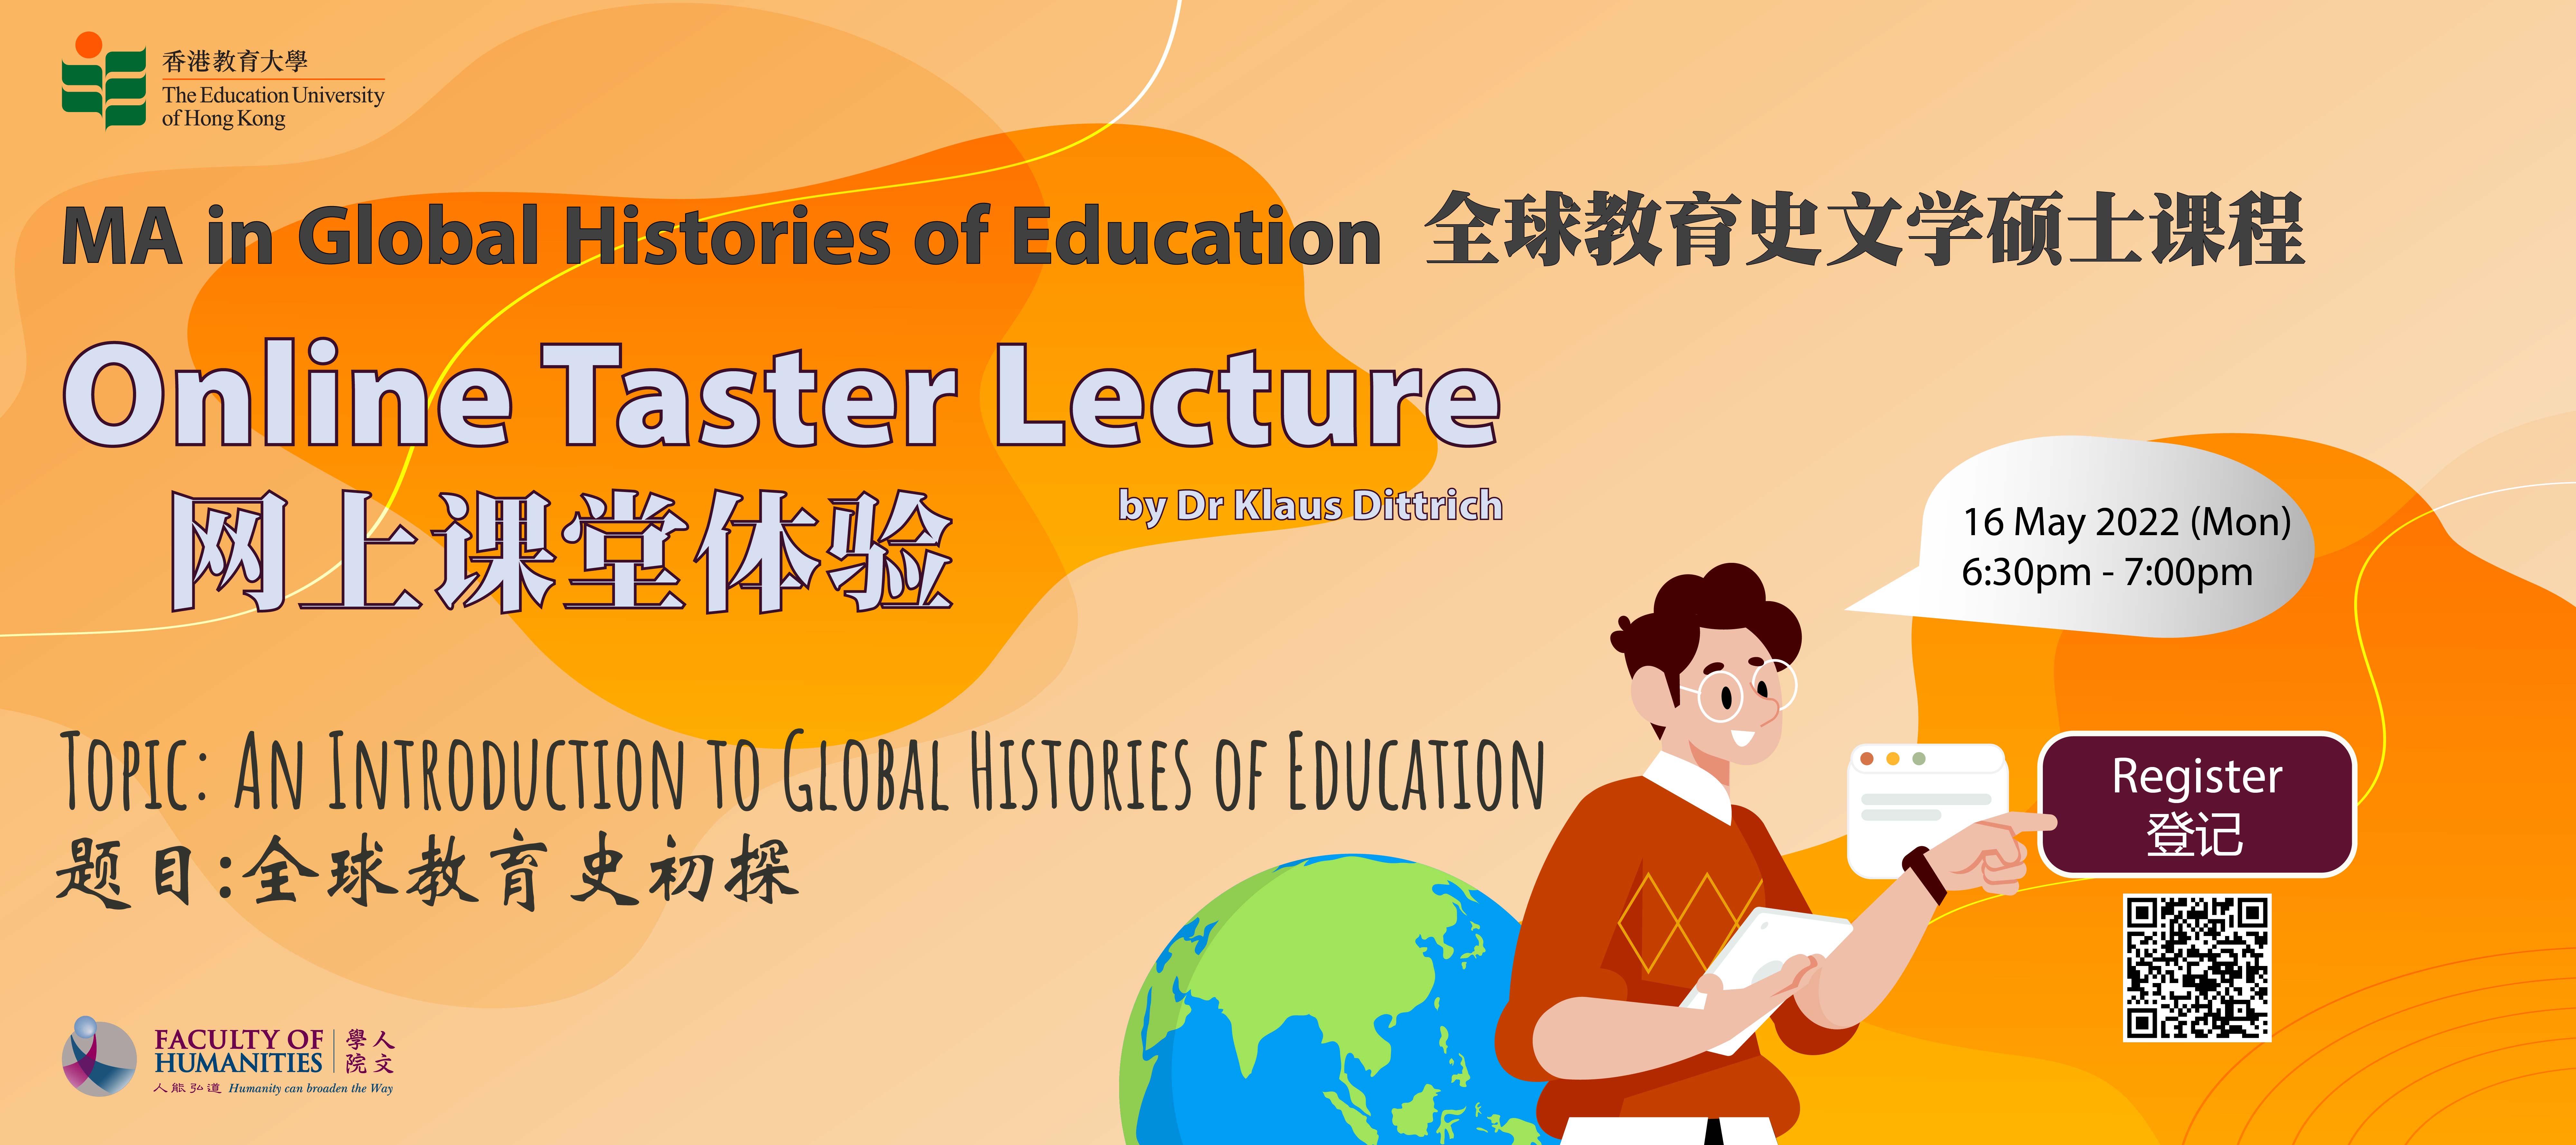 MA in Global Histories of Education - Online Taster Lecture